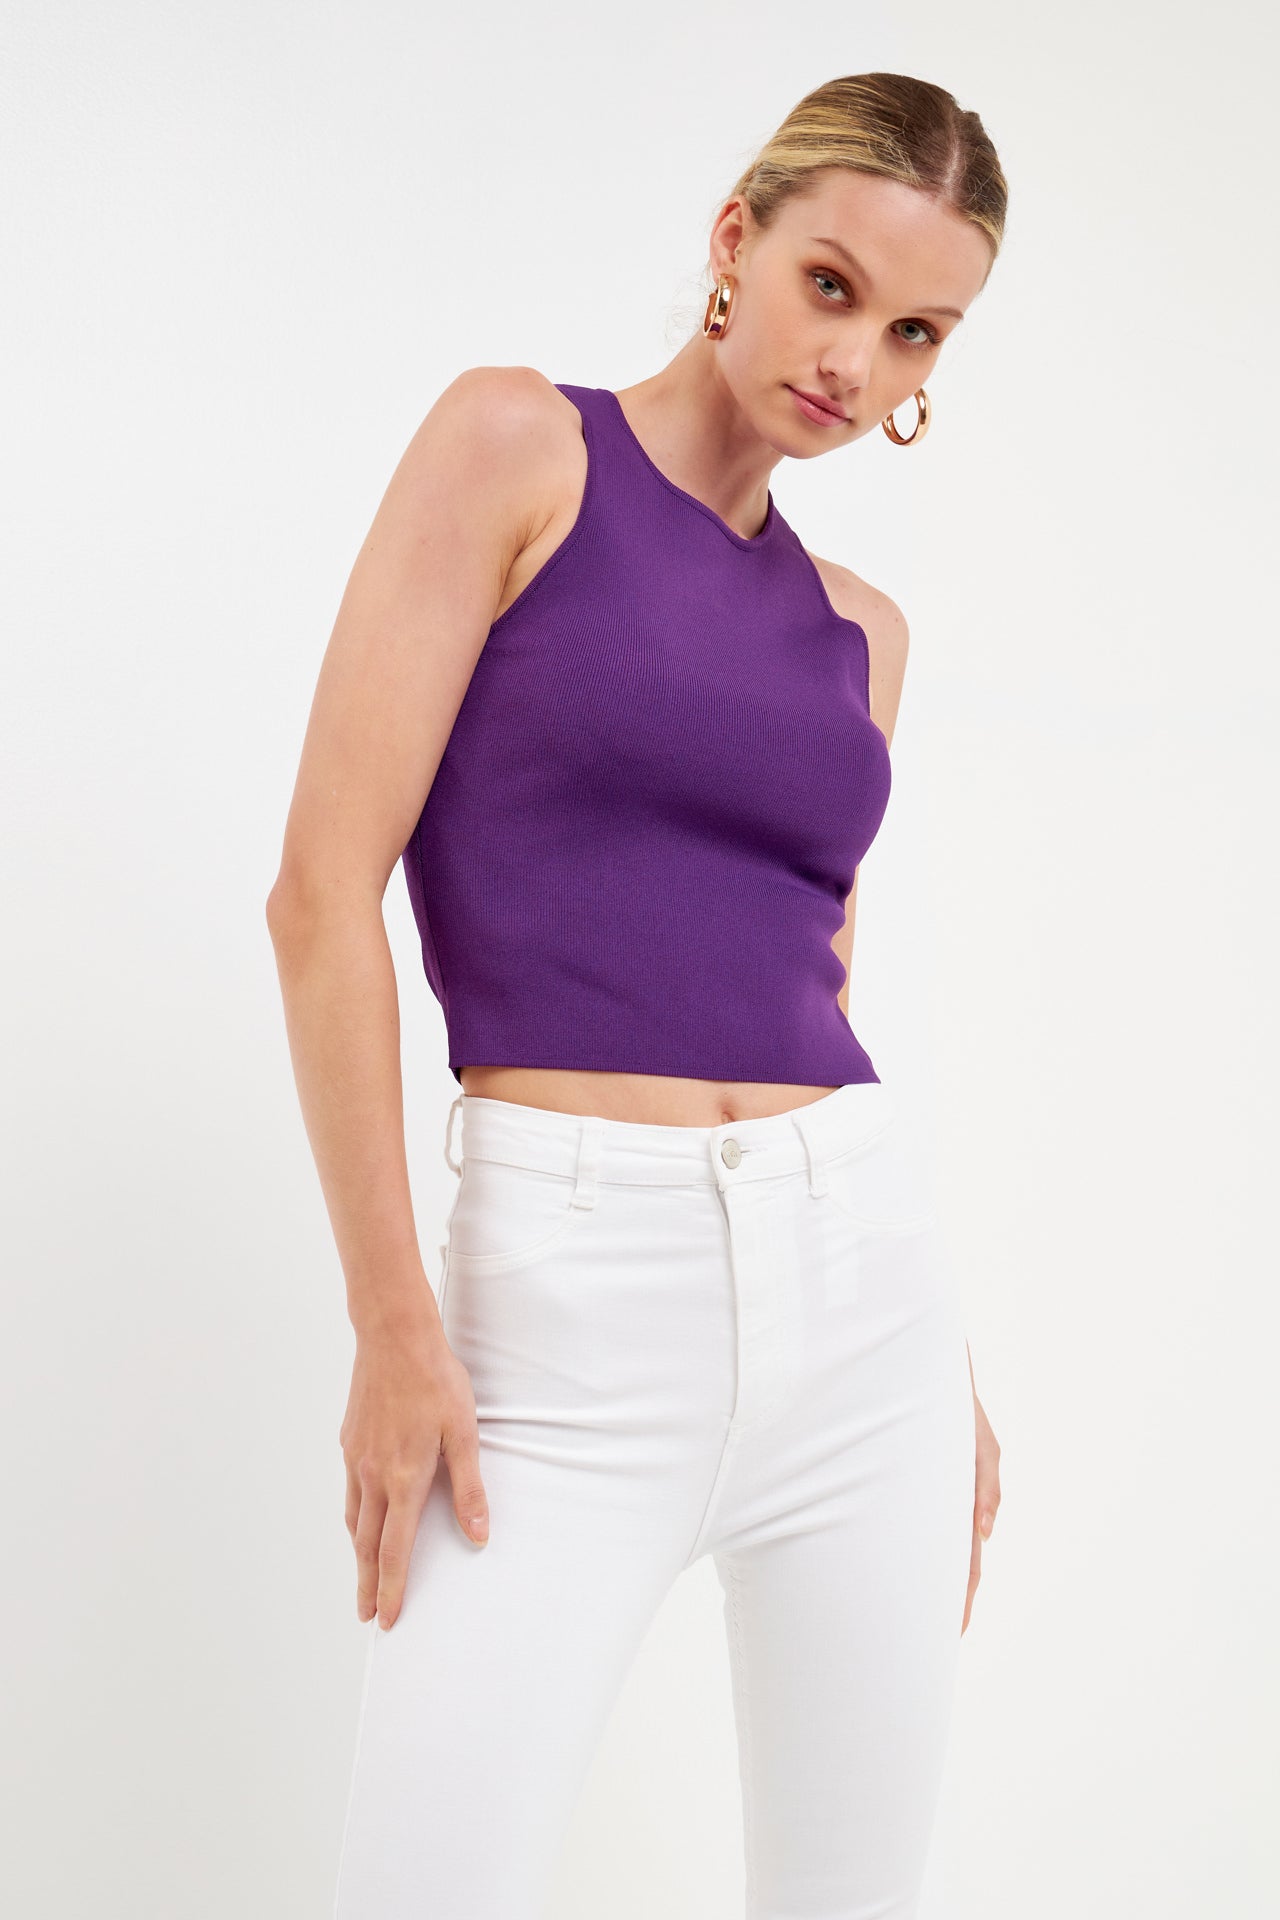 ENDLESS ROSE - Racerback Knit Tank - CAMI TOPS & TANK available at Objectrare